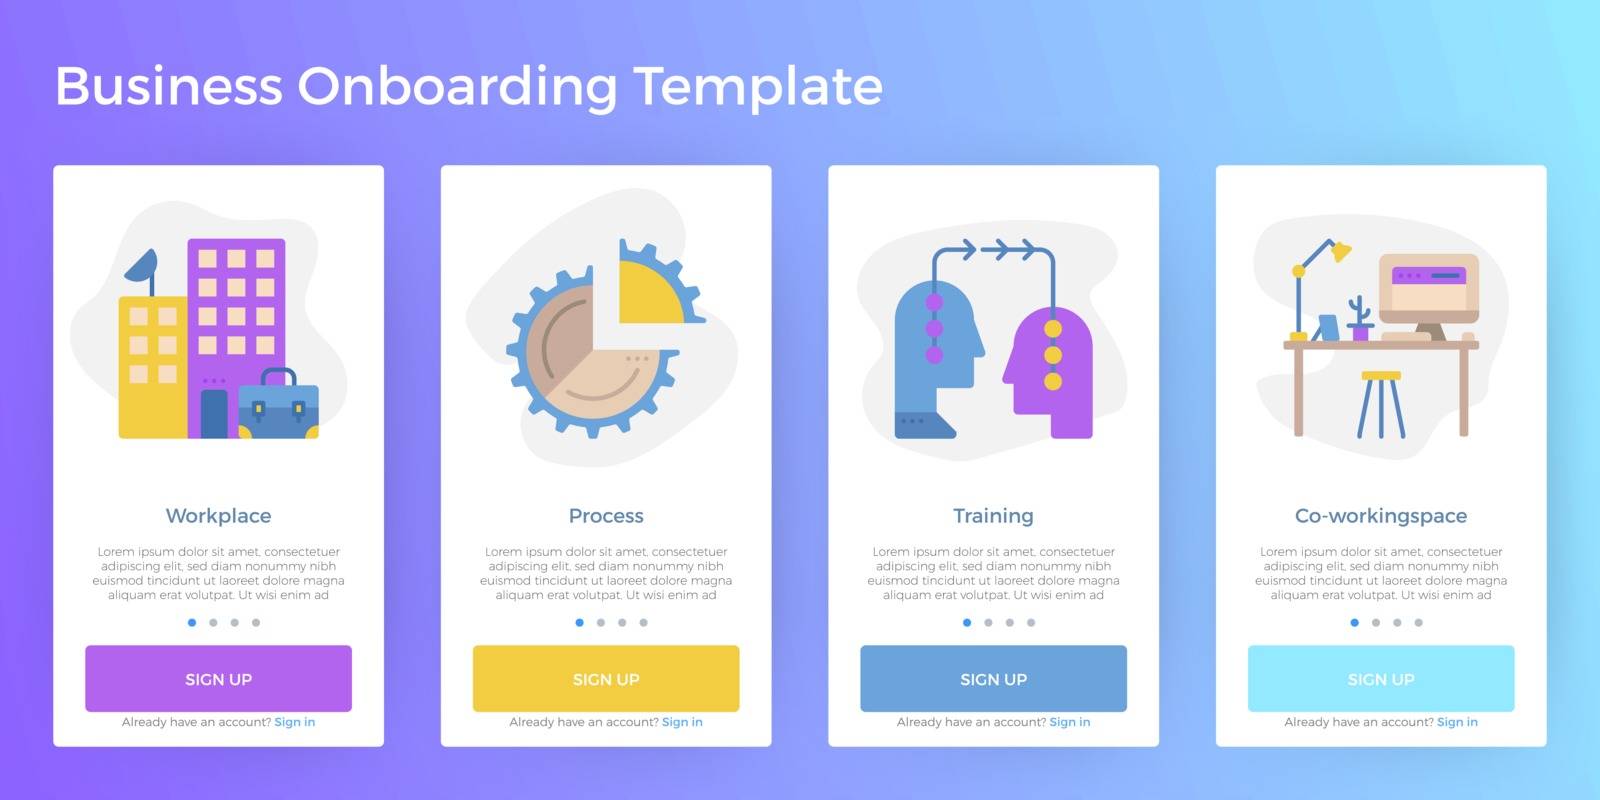 Business Mobile App Onboarding Template by nongpimmy